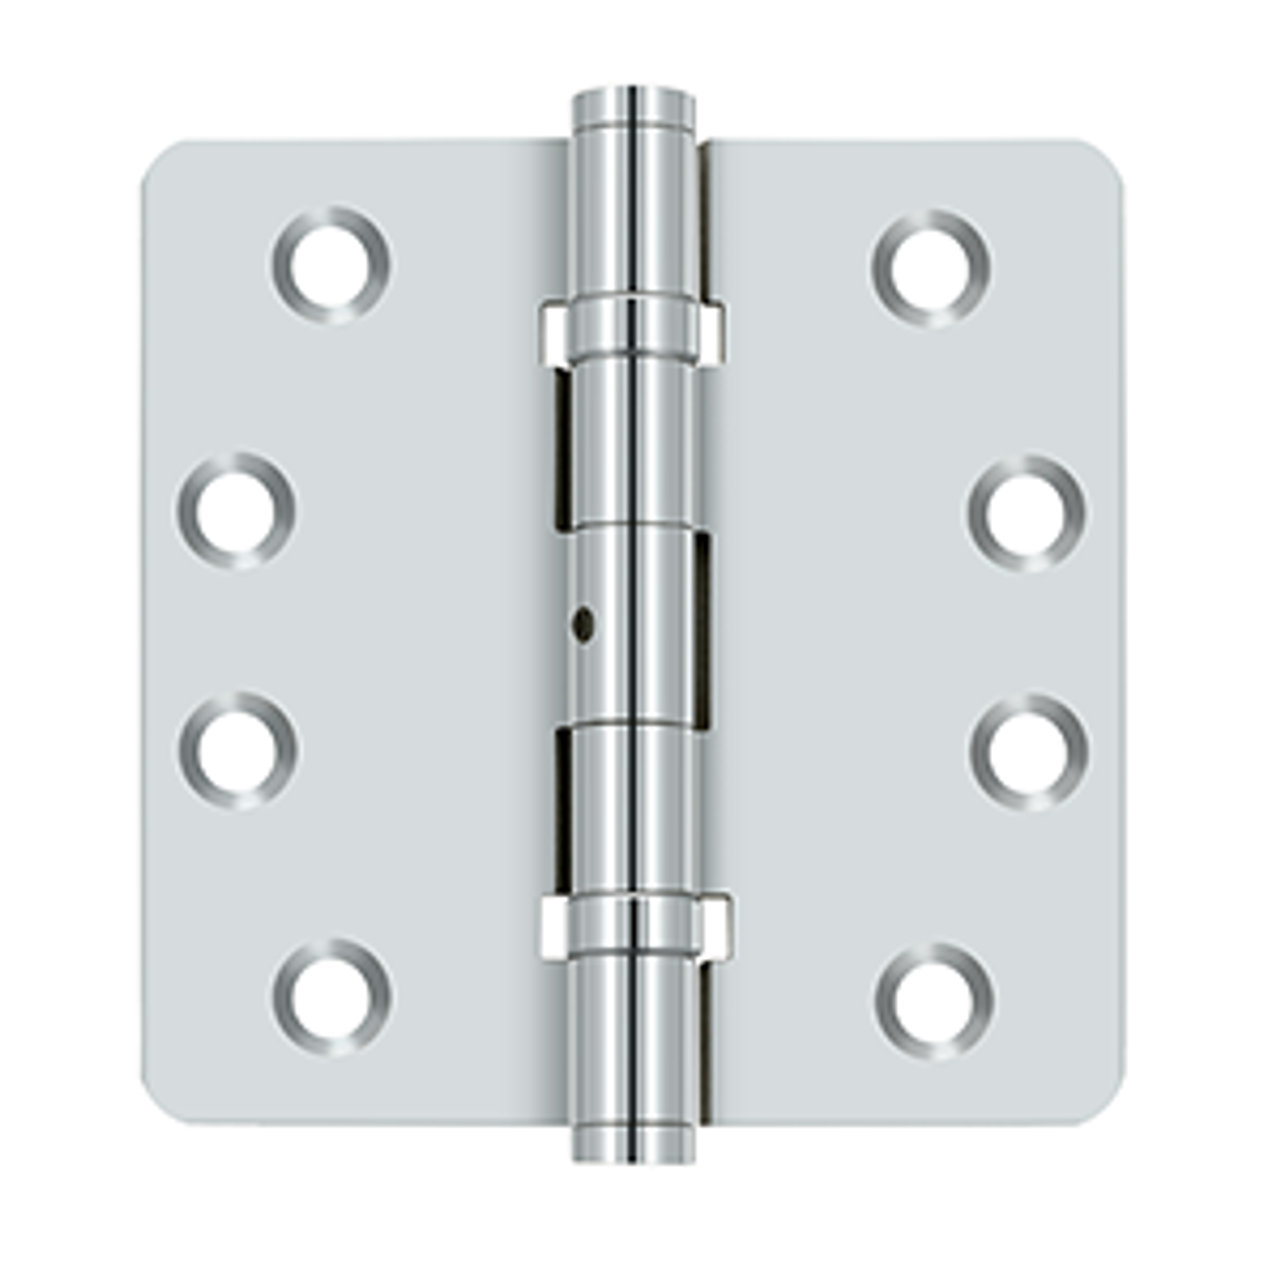 Deltana DSB4R4NB SERIES 4" X 4" X 1/4" RADIUS HINGES, BALL BEARINGS, NON-REMOVEABLE-PIN, SOLID BRASS